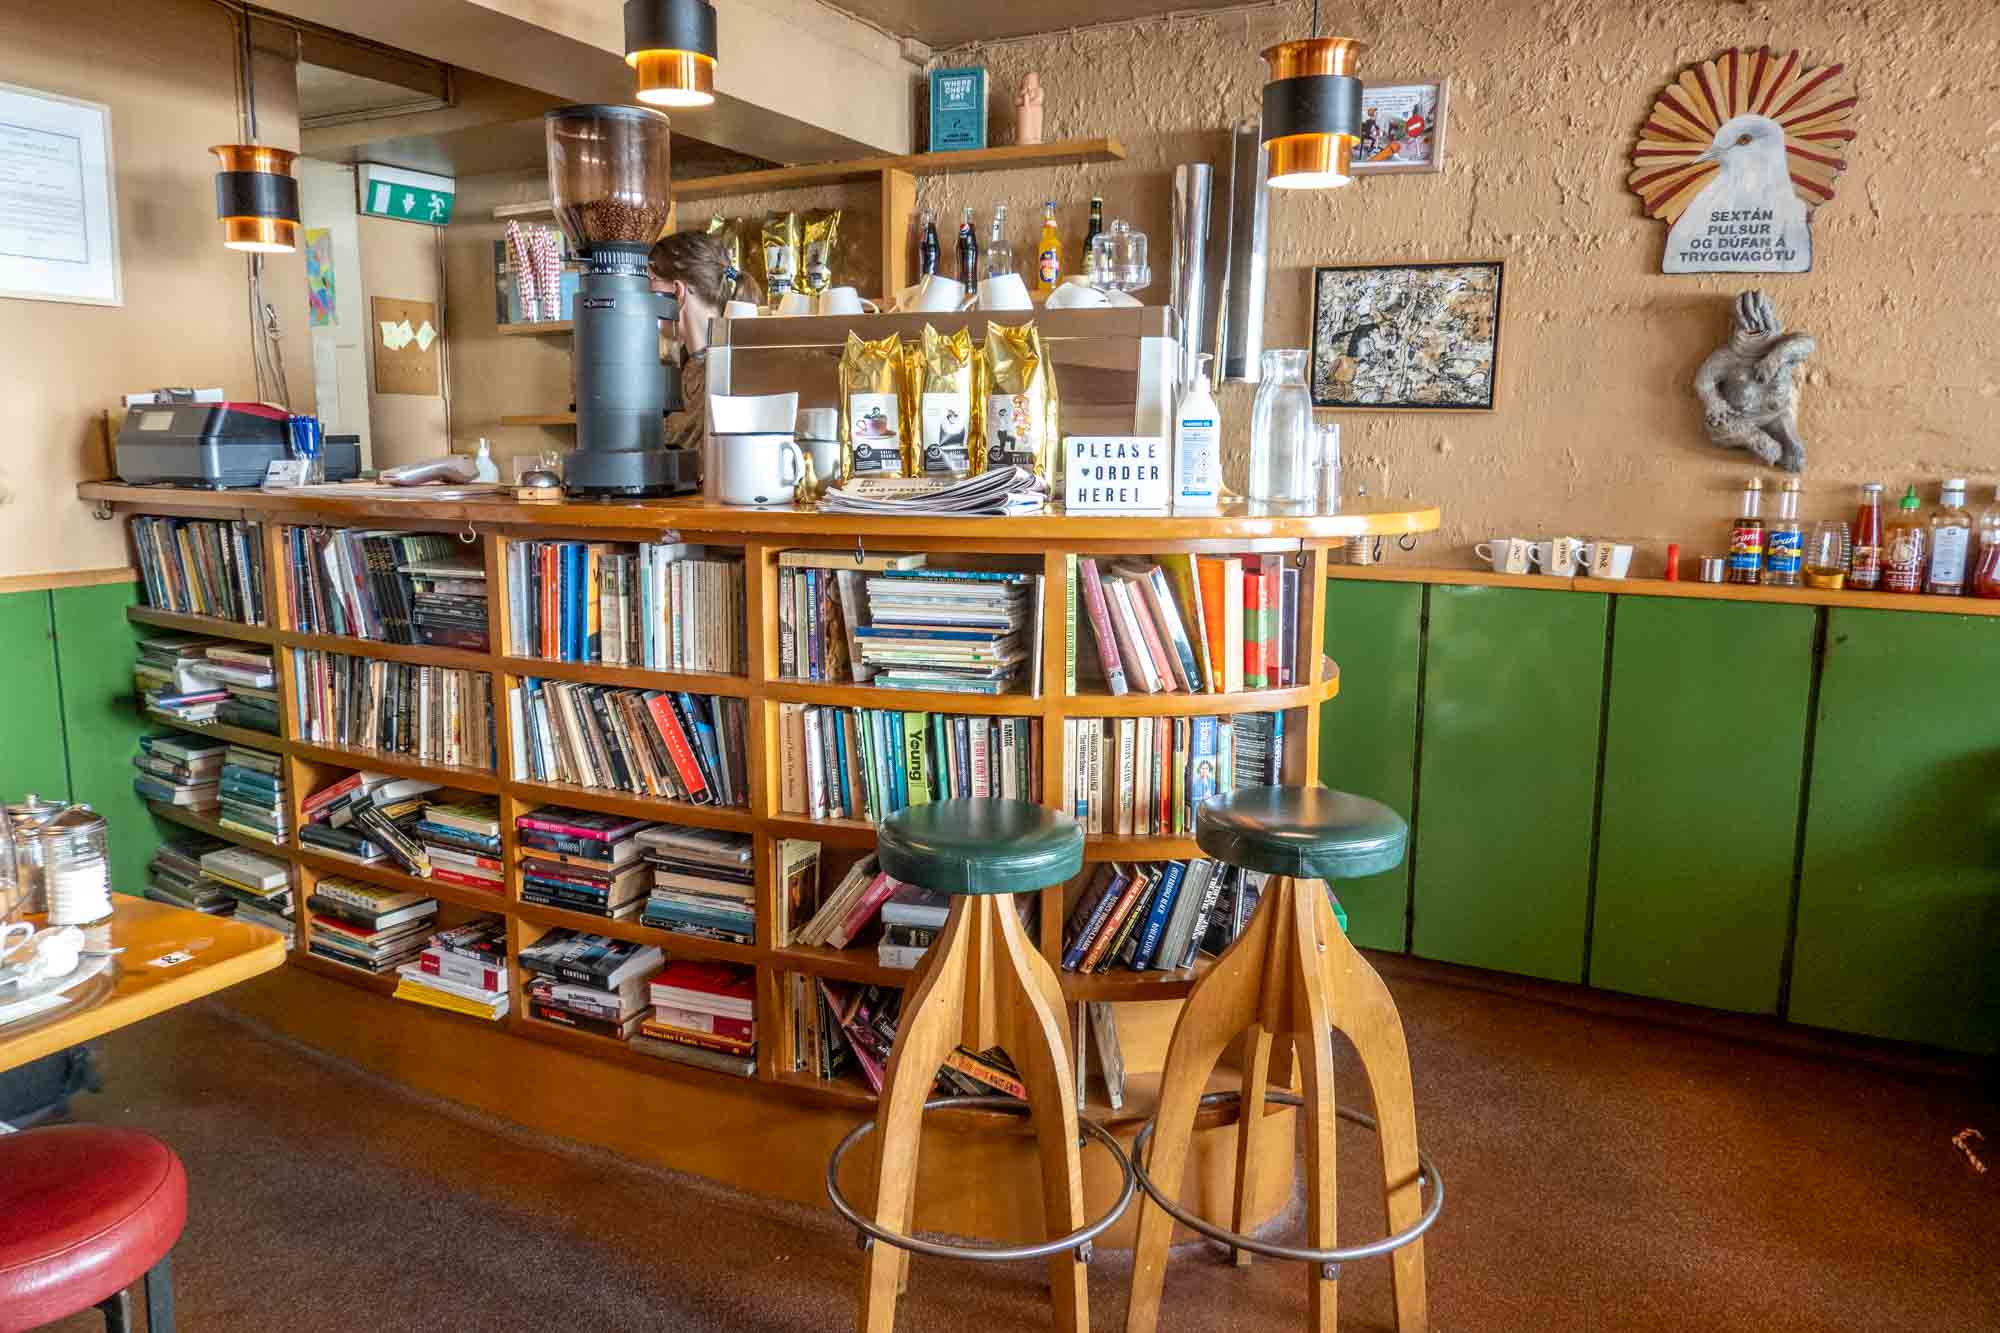 Interior of cafe with coffee bar and books